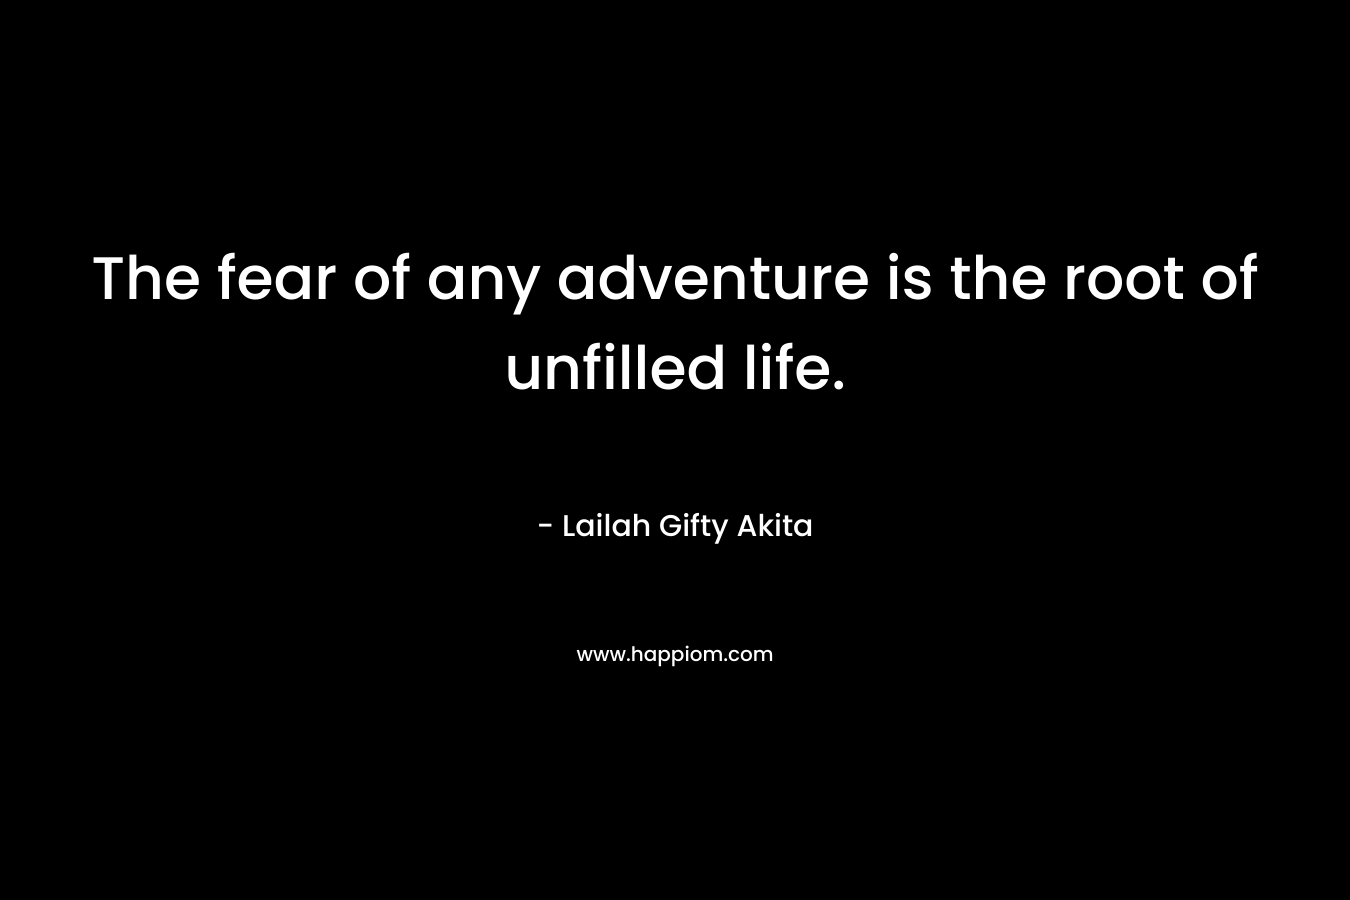 The fear of any adventure is the root of unfilled life. – Lailah Gifty Akita